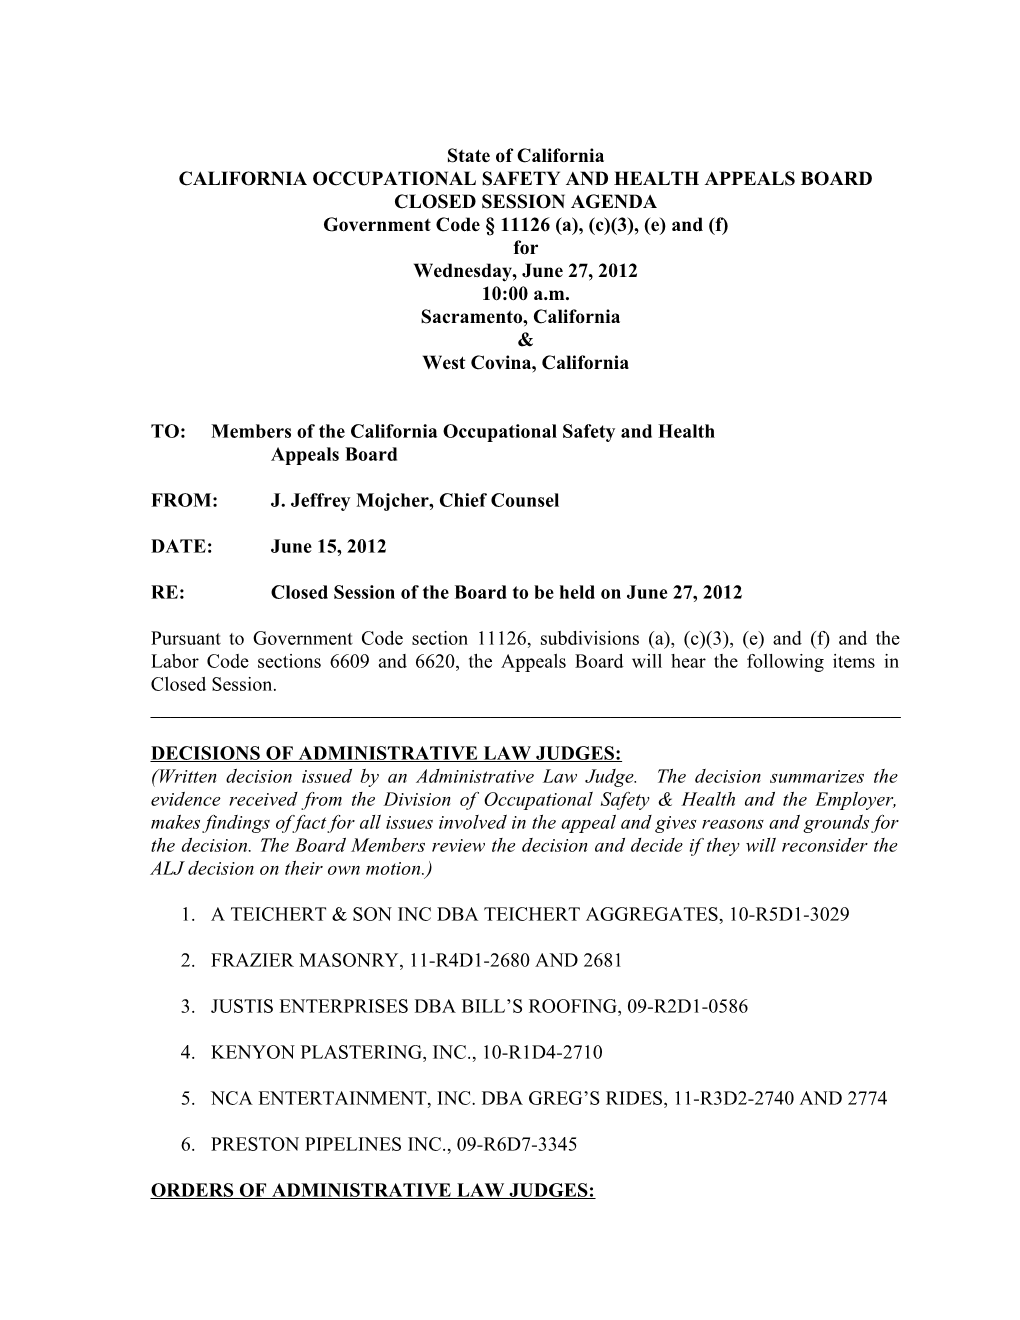 California Occupational Safety & Health Appeals Board s6